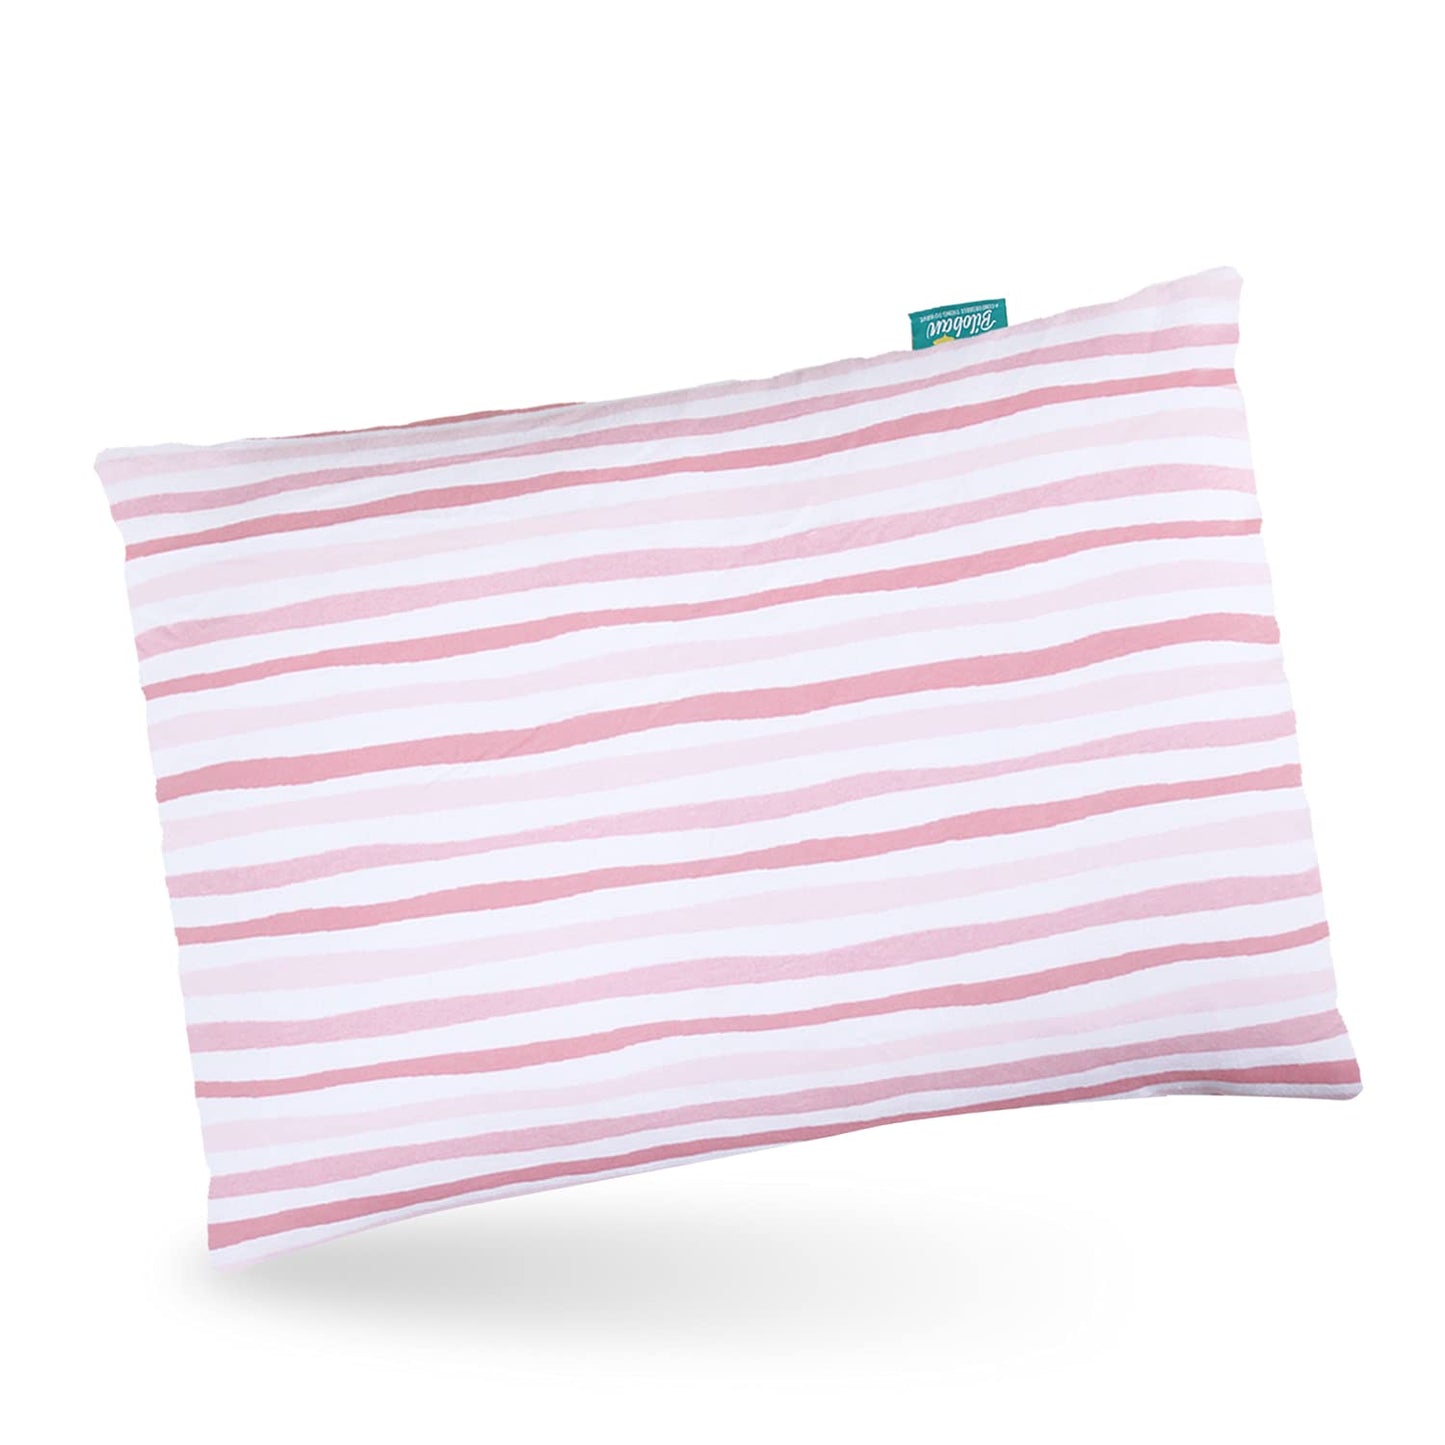 Toddler Pillow with Pillowcase-100% Cotton, Flat, Fluff, Wide, 13"x 18”, Pink Stripe